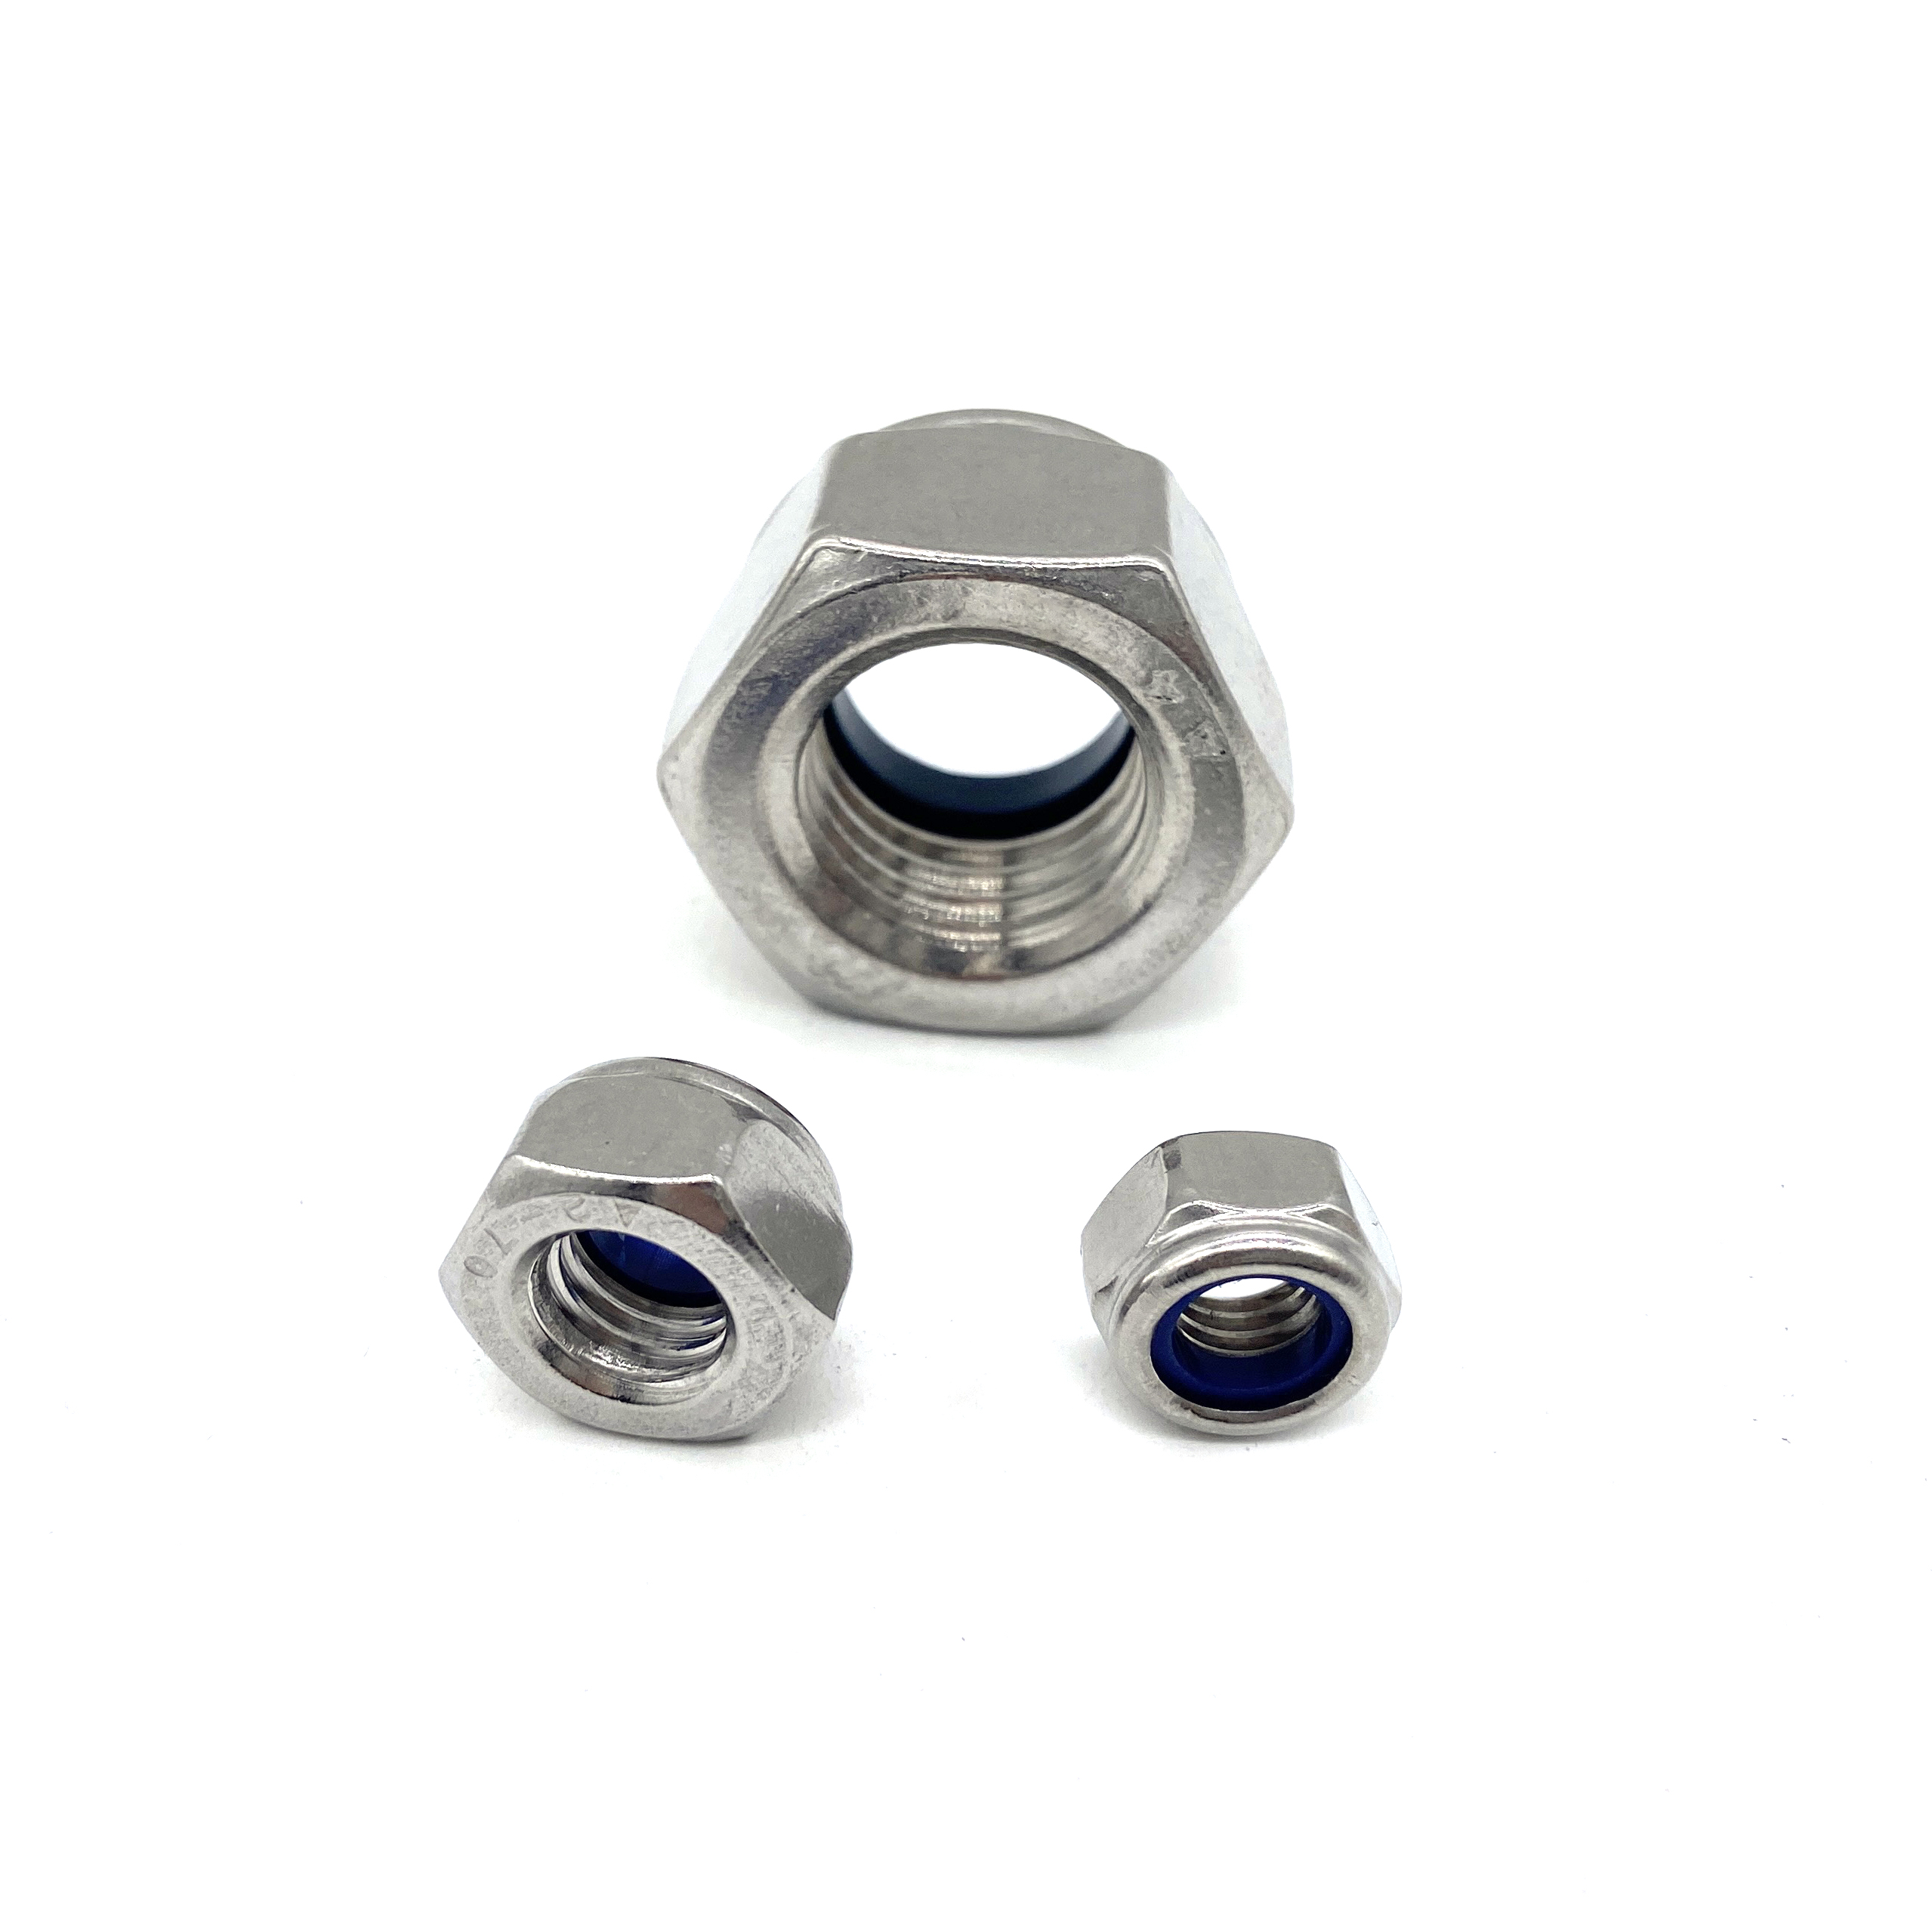 Nyloc Nuts Stainless Steel A2 Metric Bolts Nylon Insert Locking Type T Din 985 